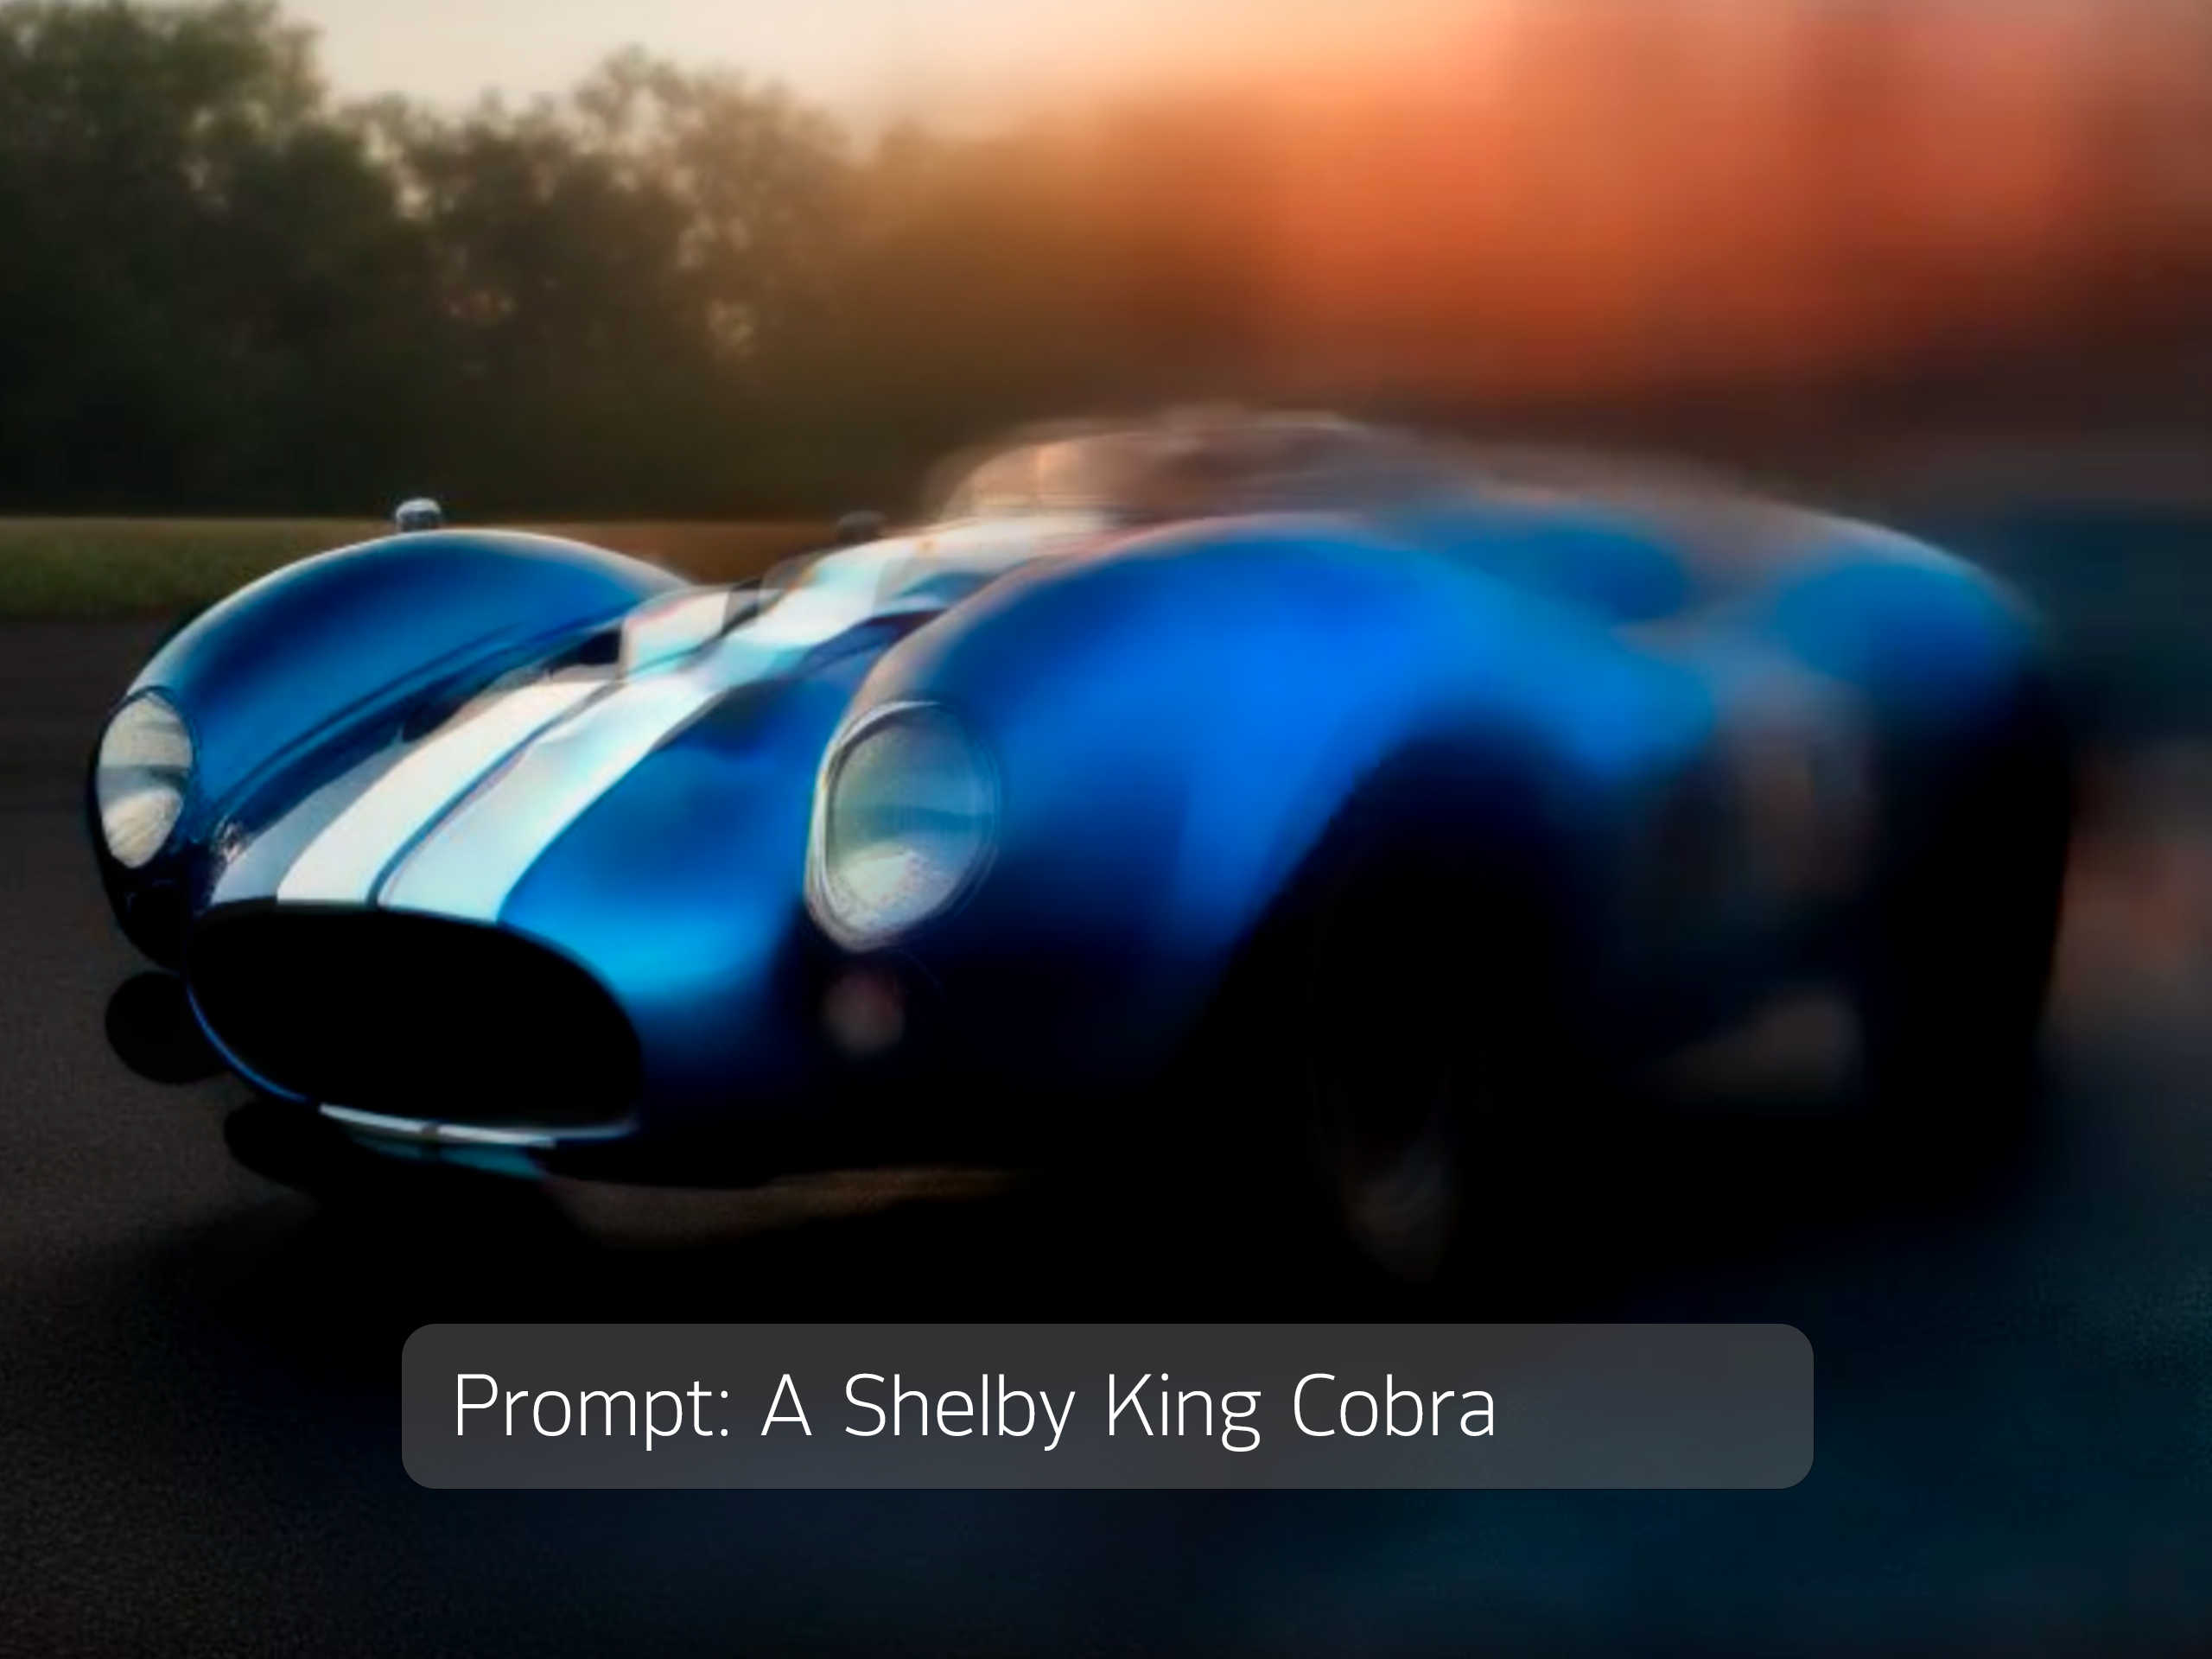  AI promted and AI generated Ford Shelby Cobra sports car in blue with white stripes, text caption: Prompt a Shelby King Kobra